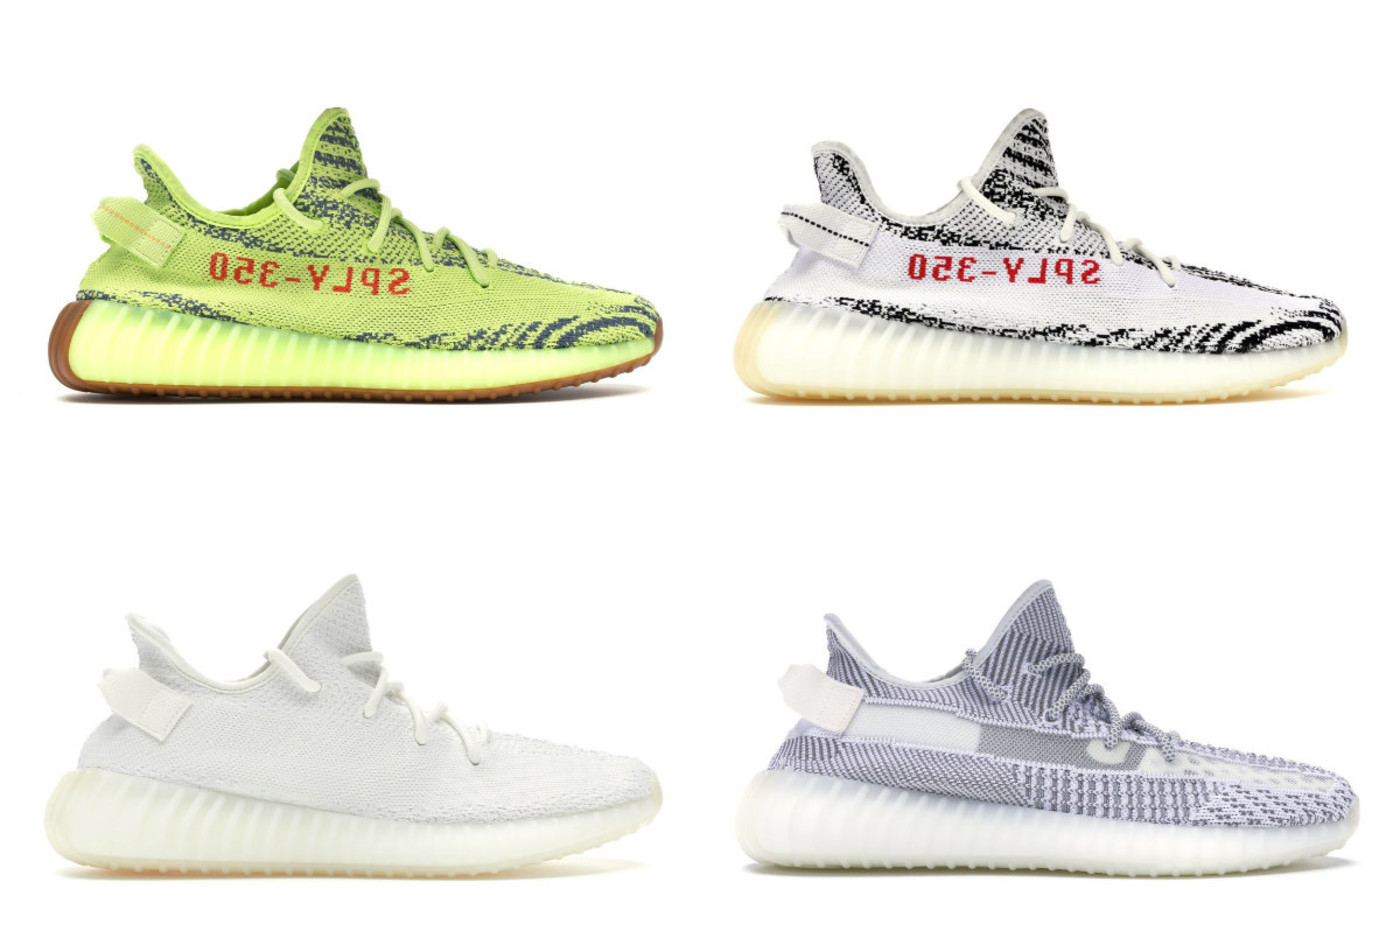 all yeezy 350 models